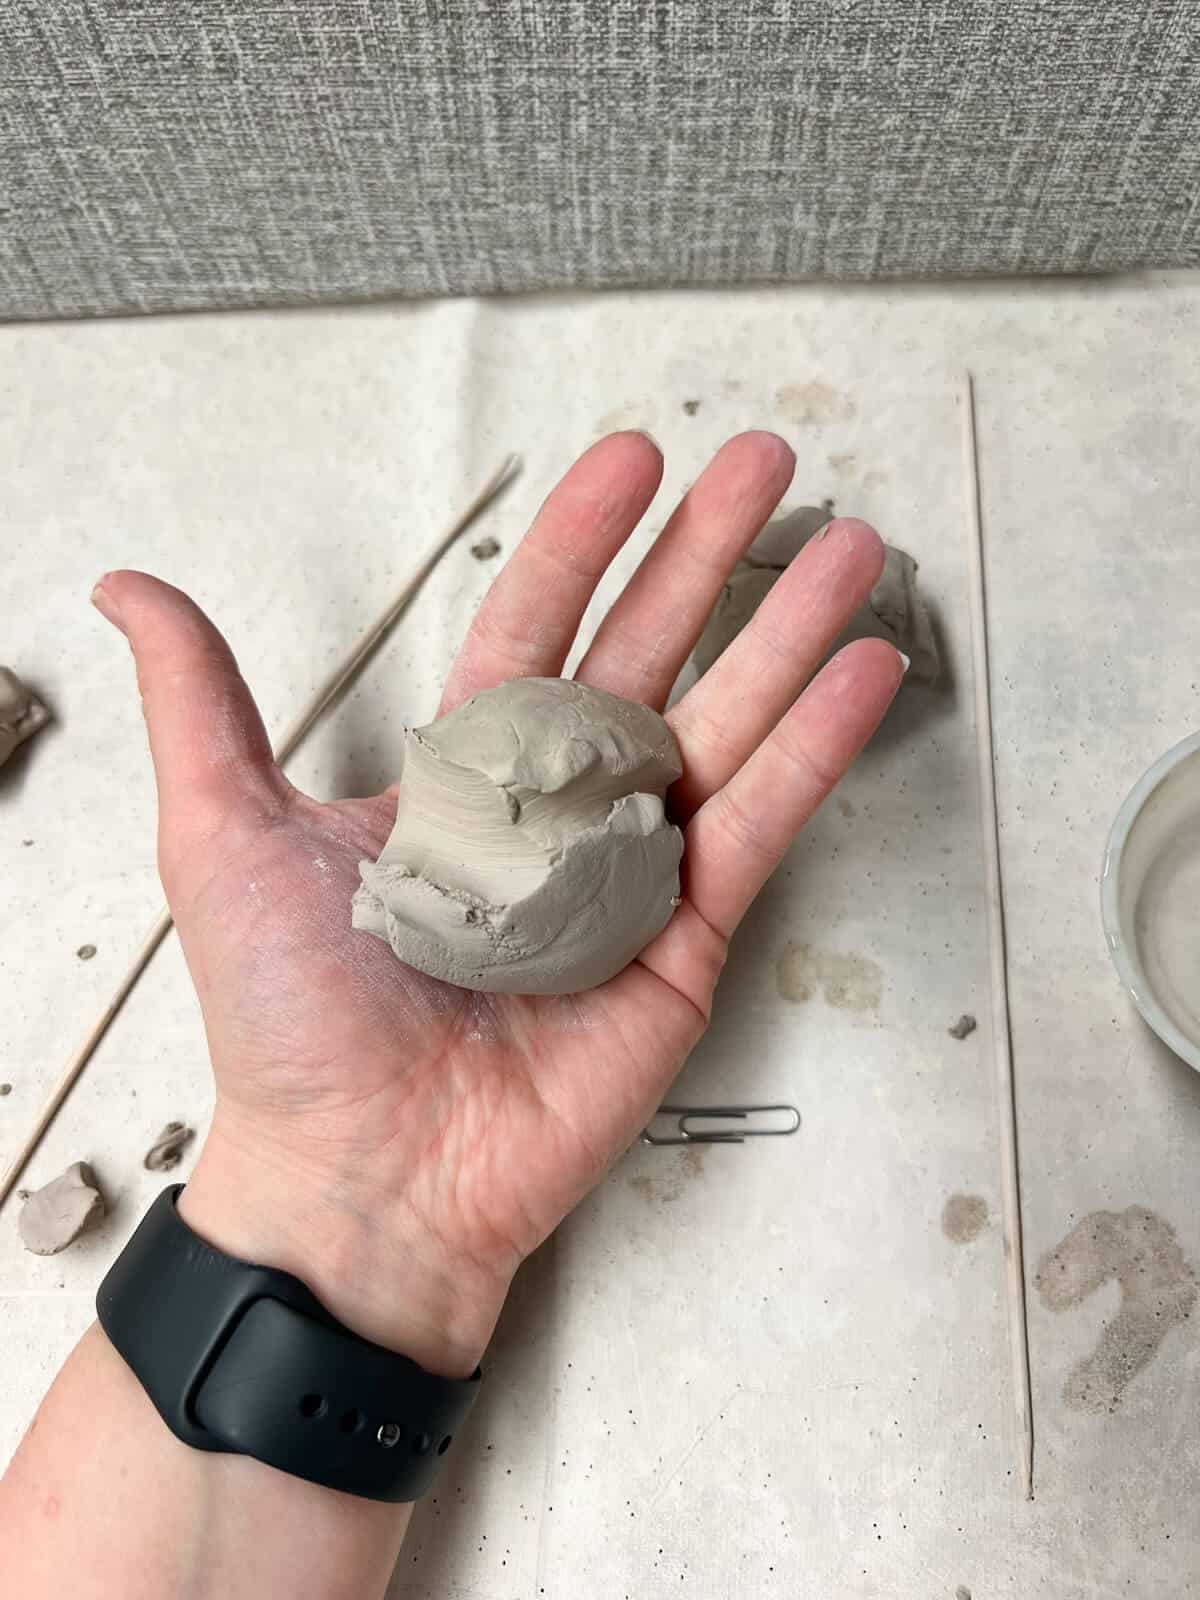 clay ball in hand before starting clay project for kids.